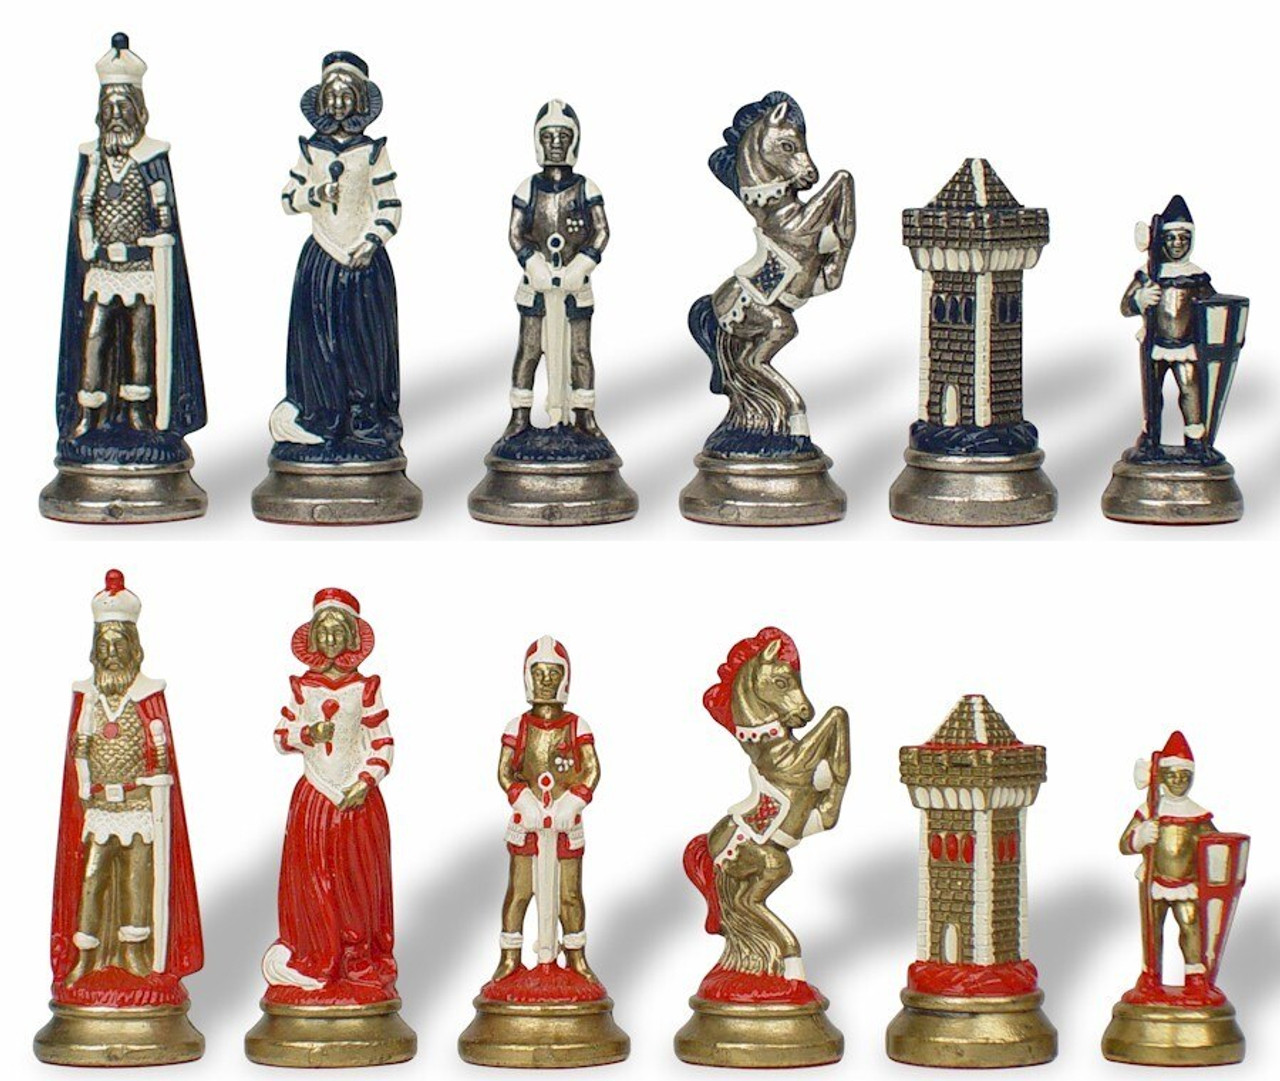 Mary Stuart Queen Of Scots Theme Chess Set With Brass Nickel Hand Painted Pieces By Italfama